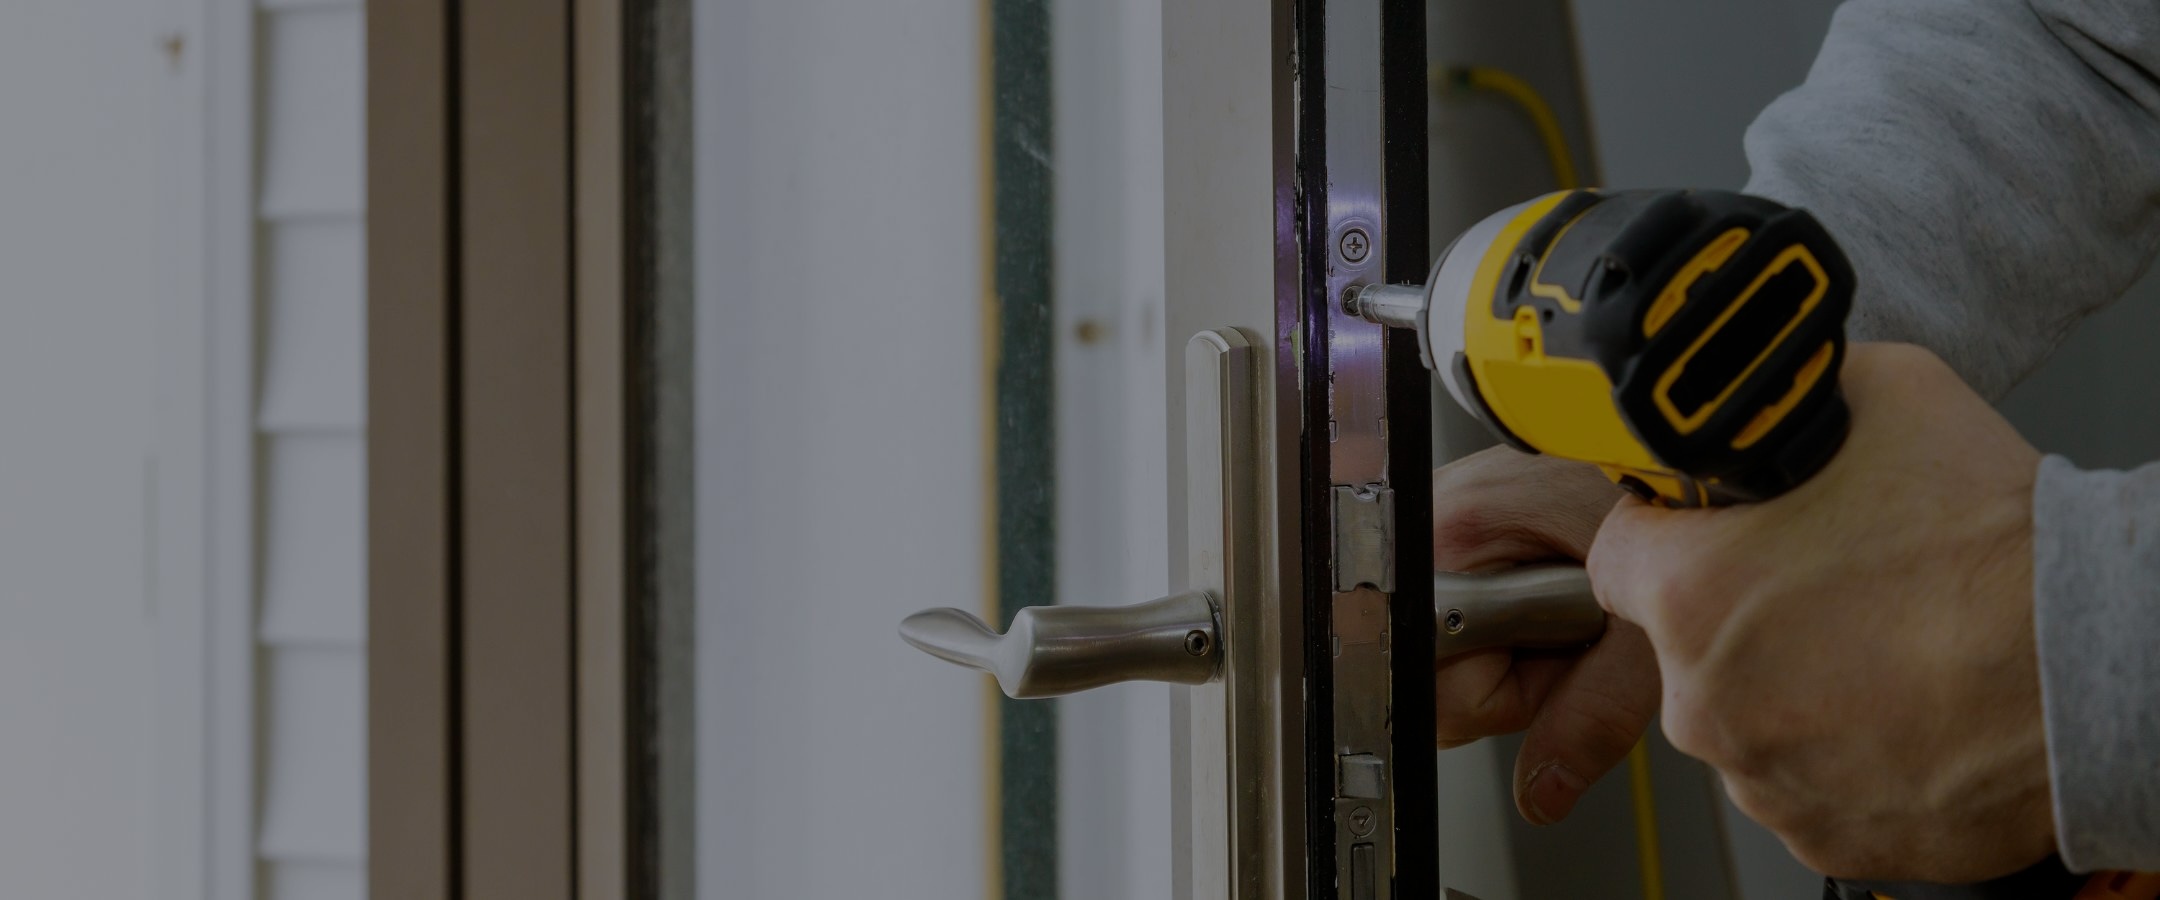 Quality 24-hr Locksmith Services Throughout the GTA